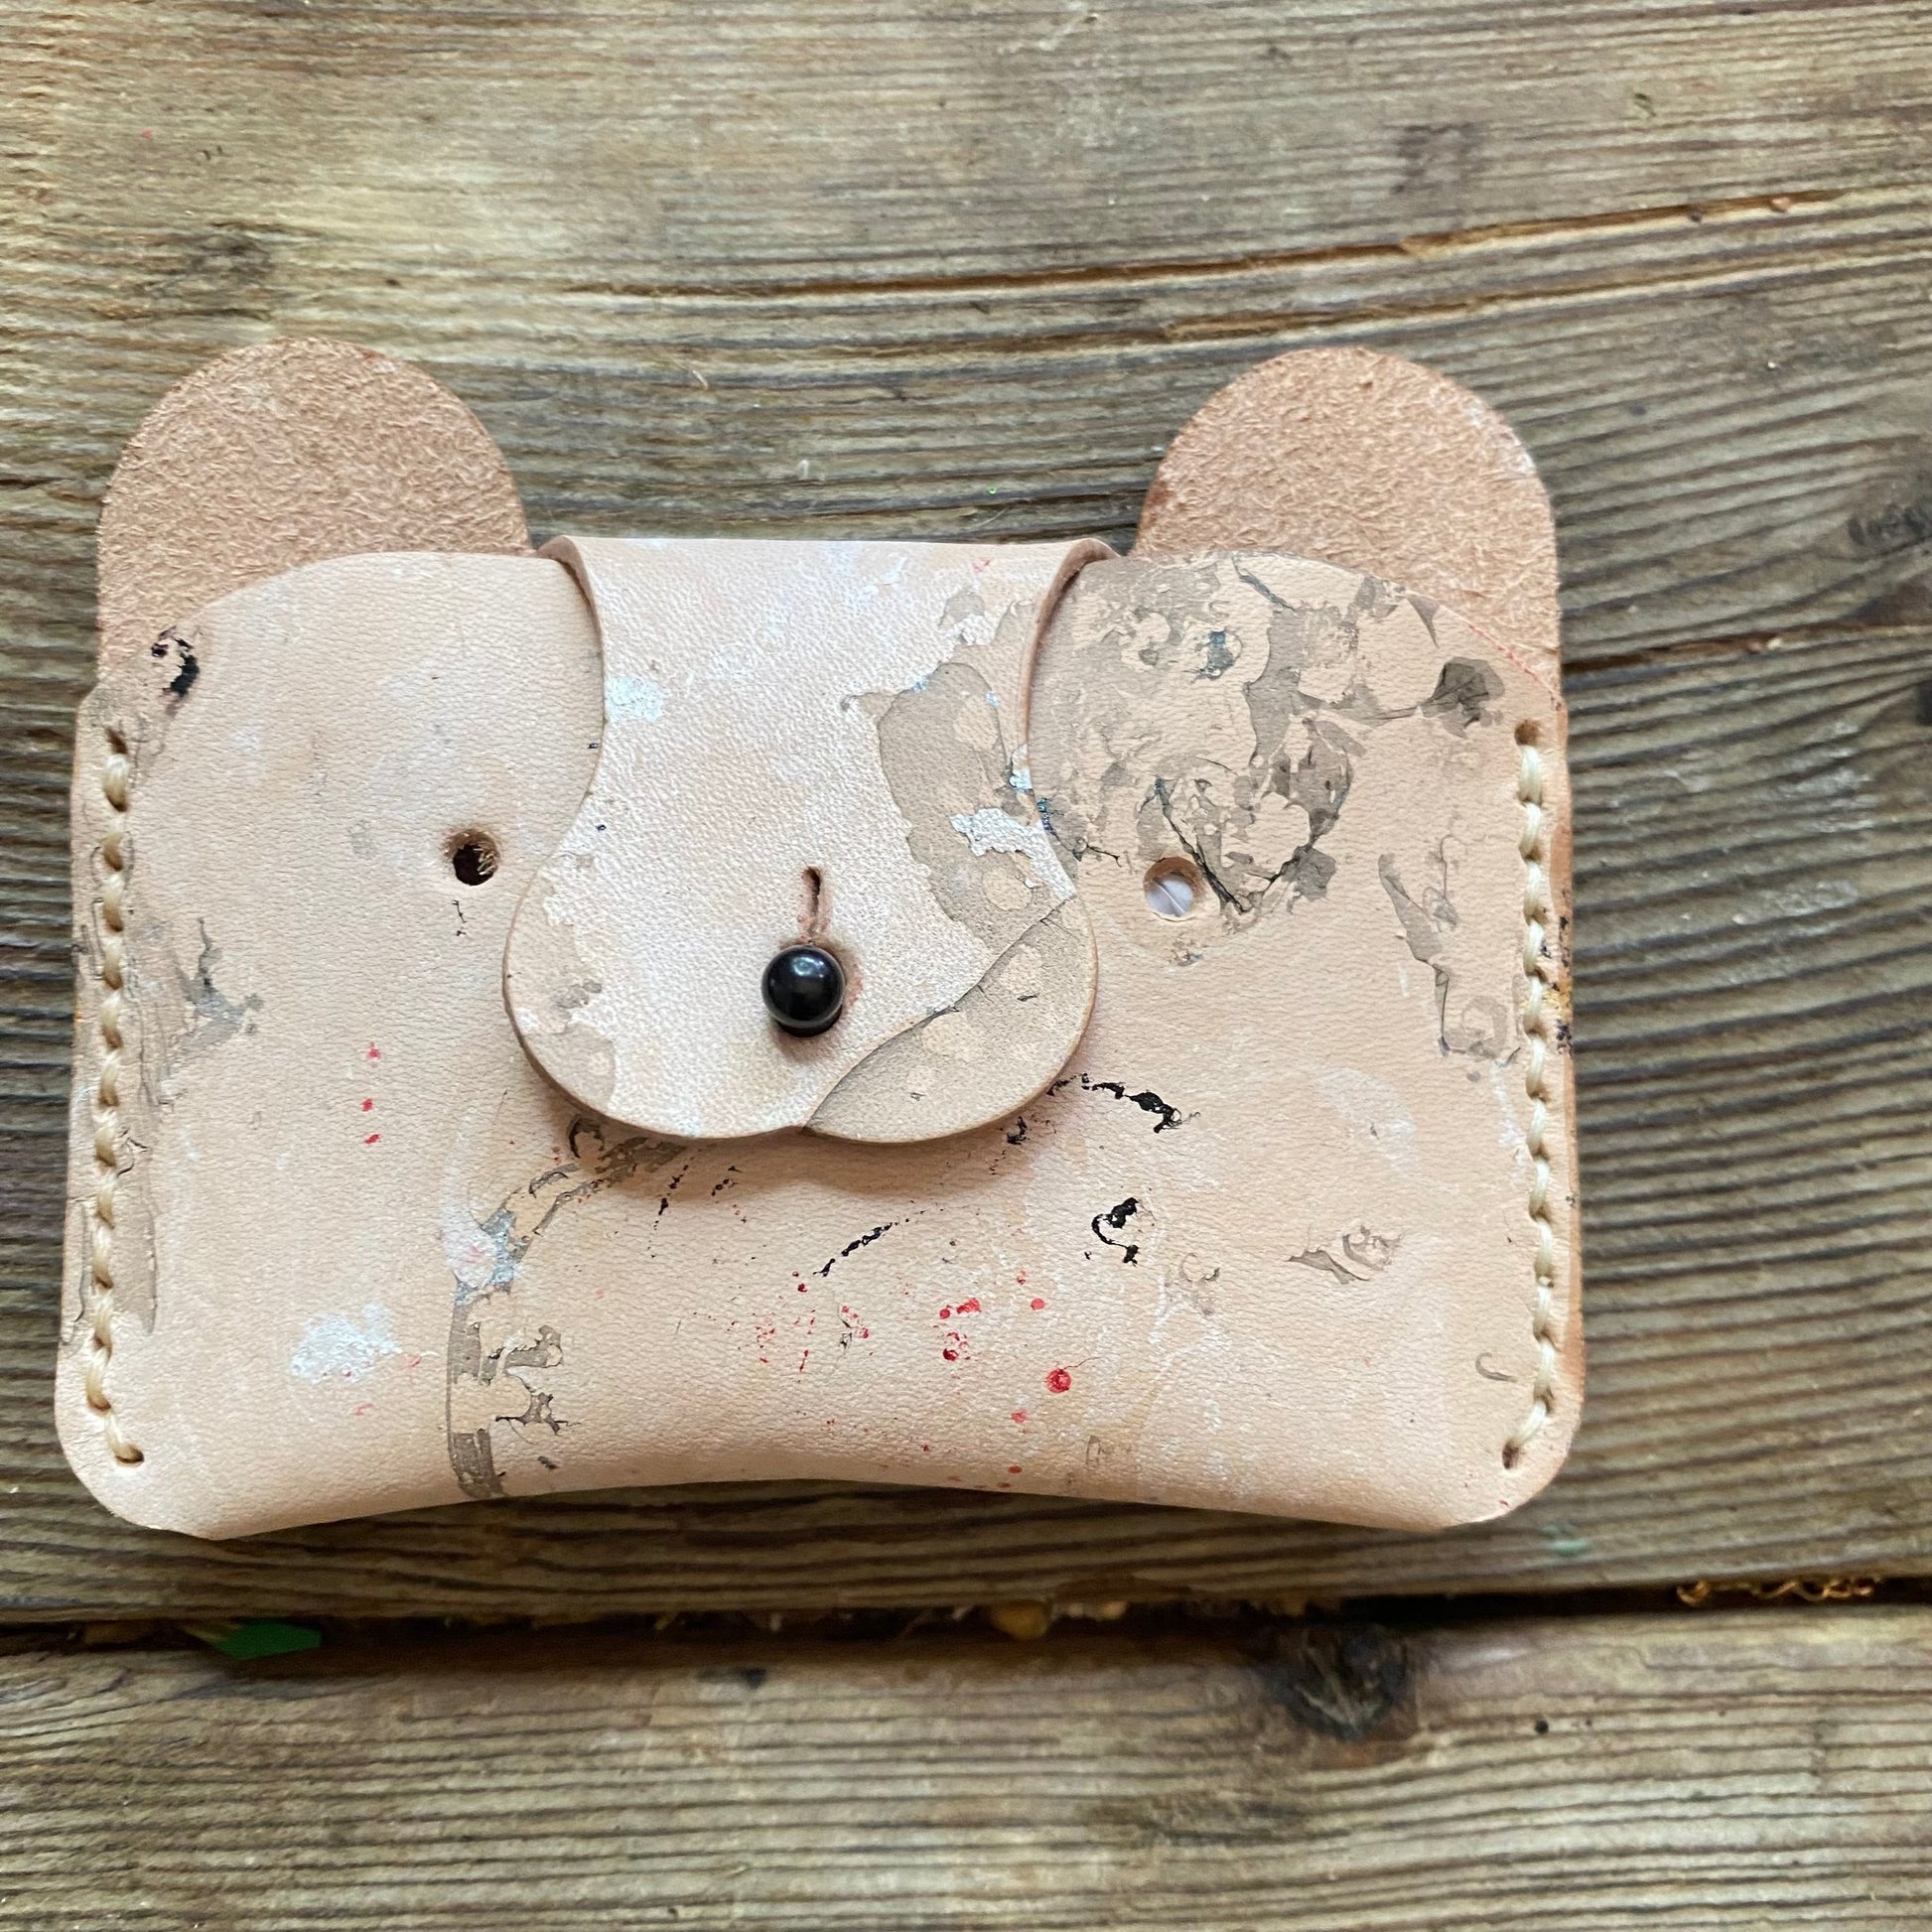 Small leather Bear Wallet for children brown suede, children, Handmade, leather, mulit-function, wallet Chaio -Apparel & Accessories